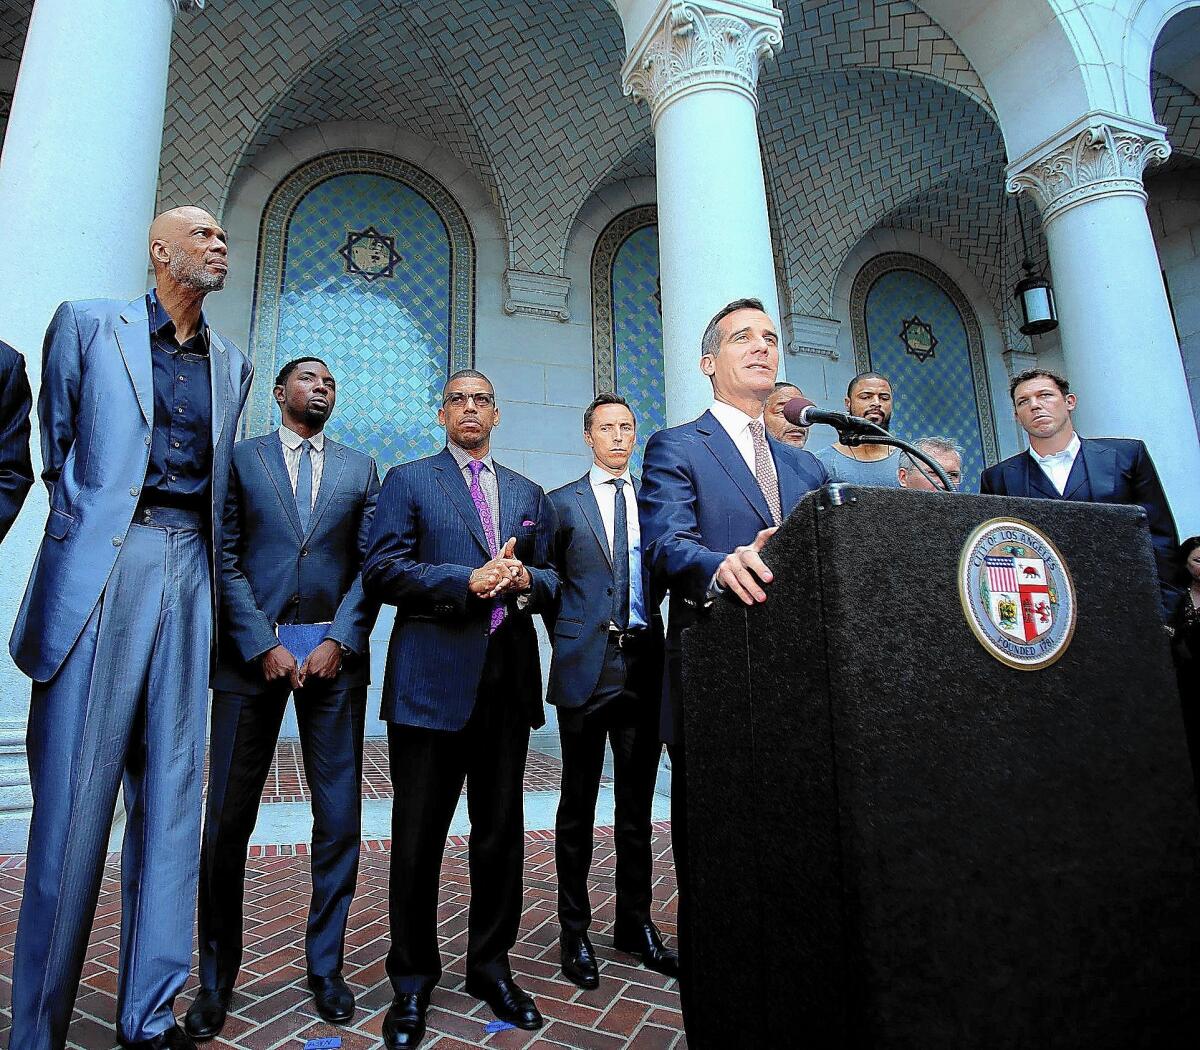 L.A. Mayor Eric Garcetti, flanked by former and current professional basketball players, holds a news conference on the steps of City Hall to talk about the lifetime ban imposed by the NBA on L.A. Clippers owner Donald Sterling.